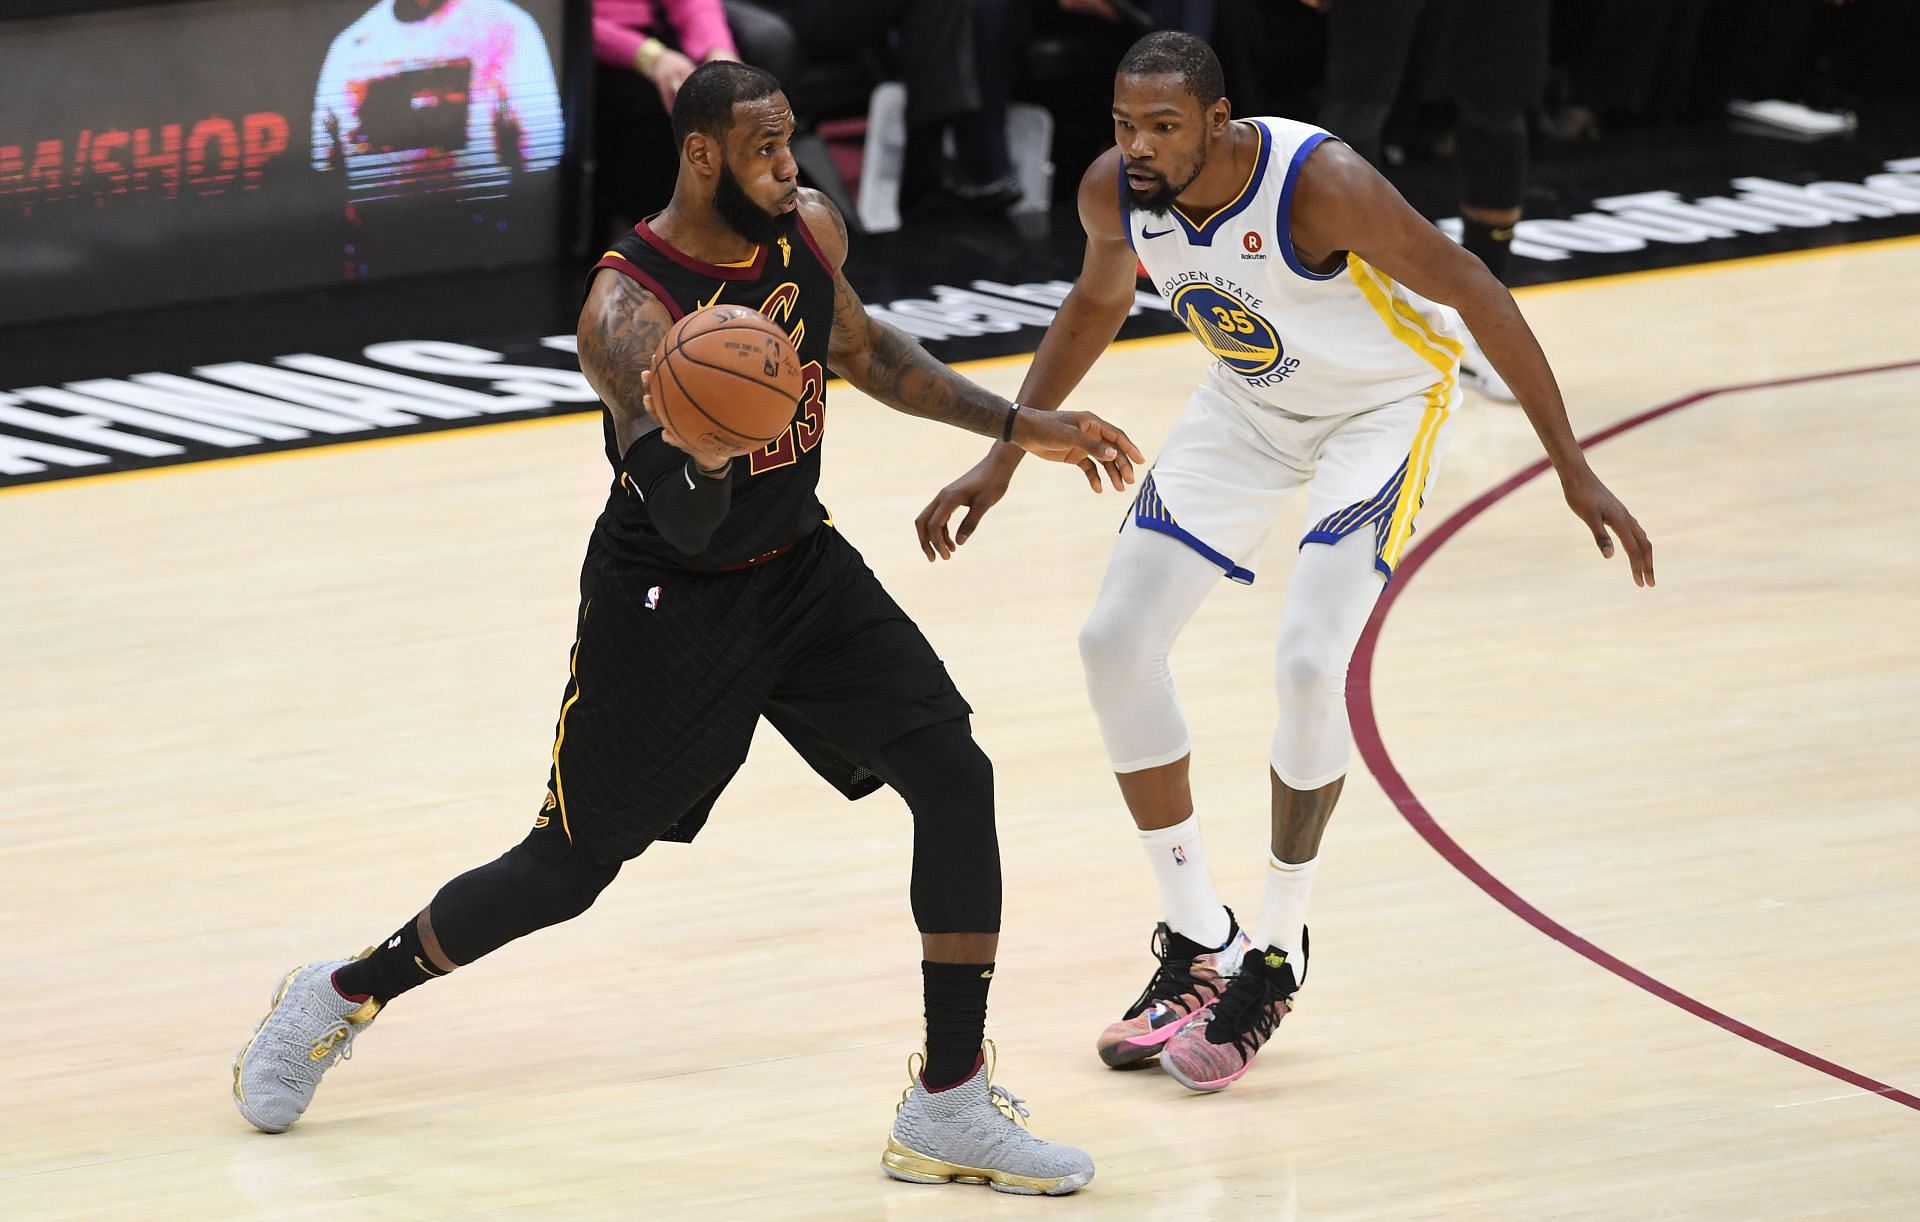 Shannon Sharpe believes LeBron James needs to be on the All-NBA second team over Kevin Durant.